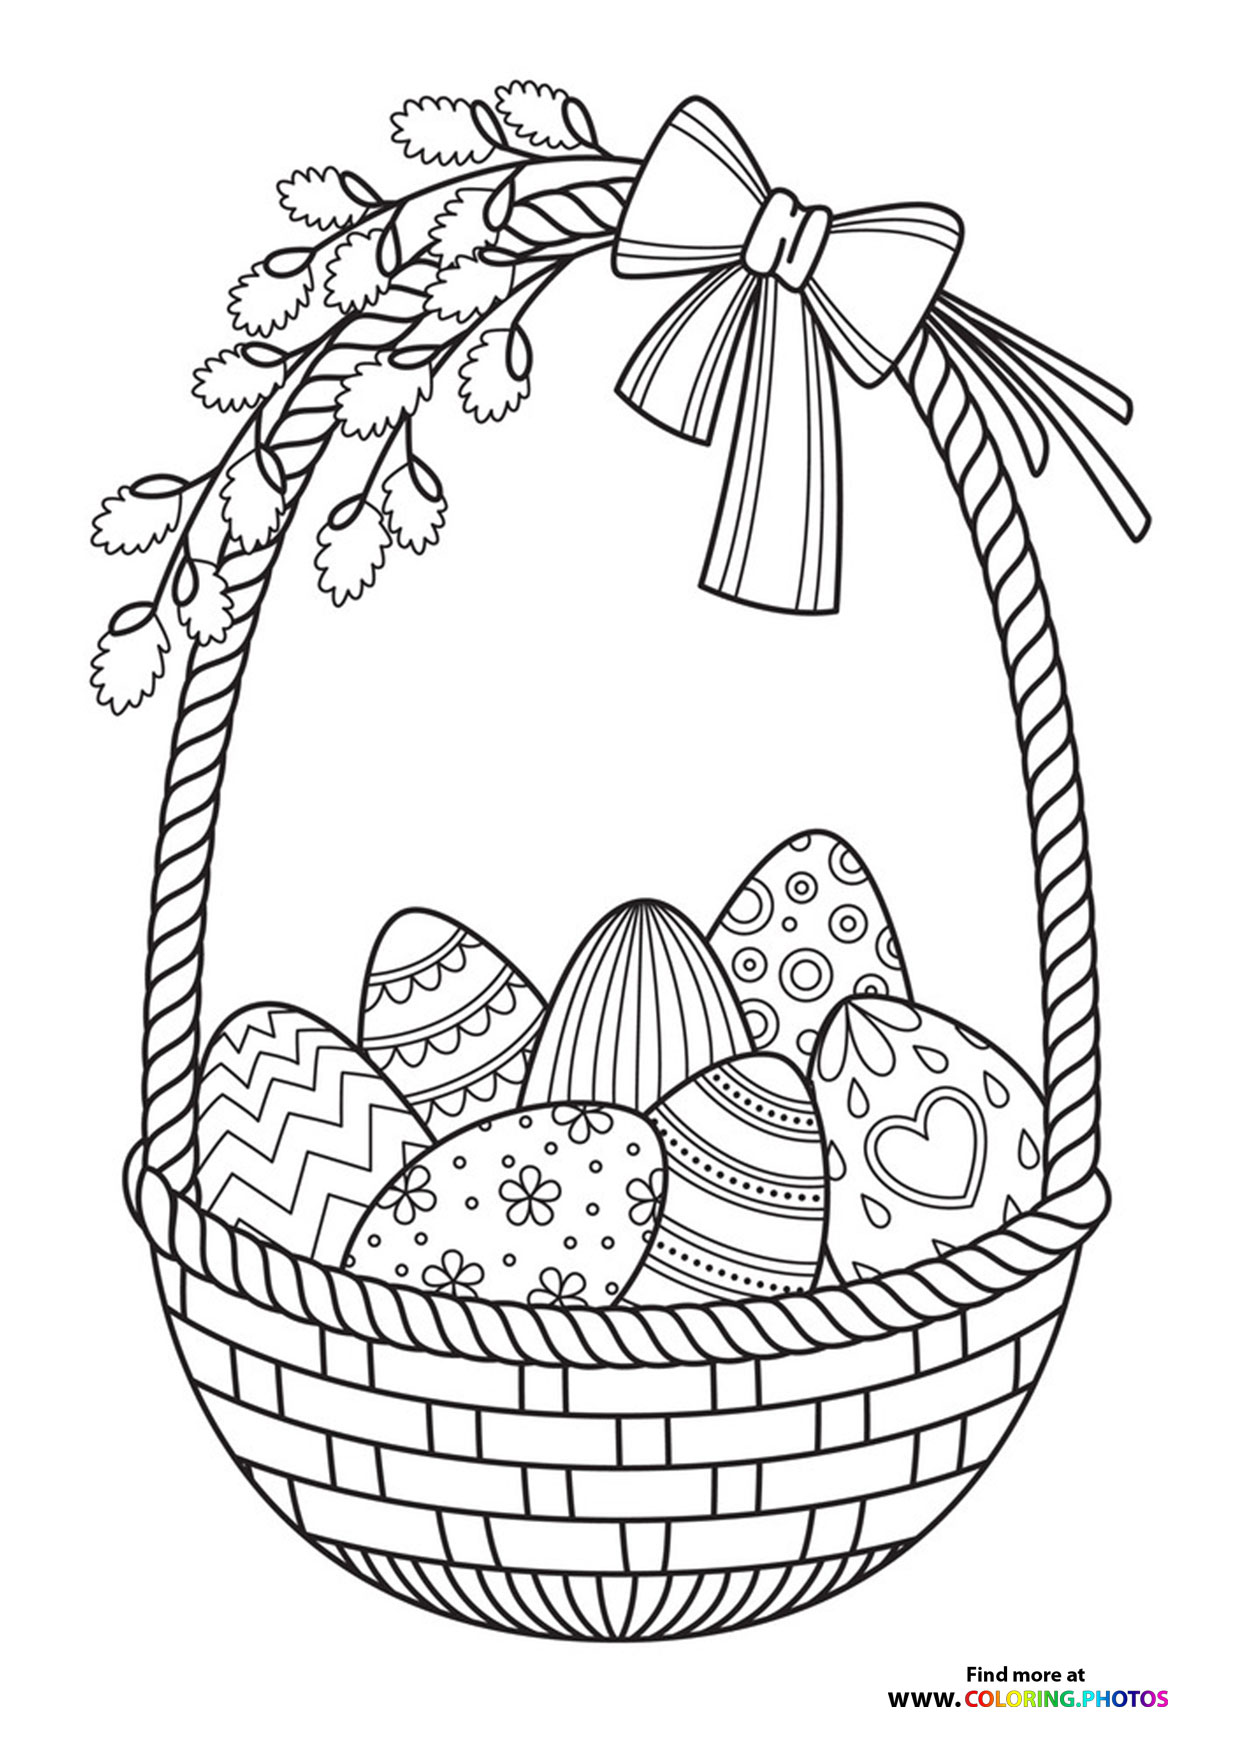 Easter baskets - Coloring Pages for kids | Free and easy print or download